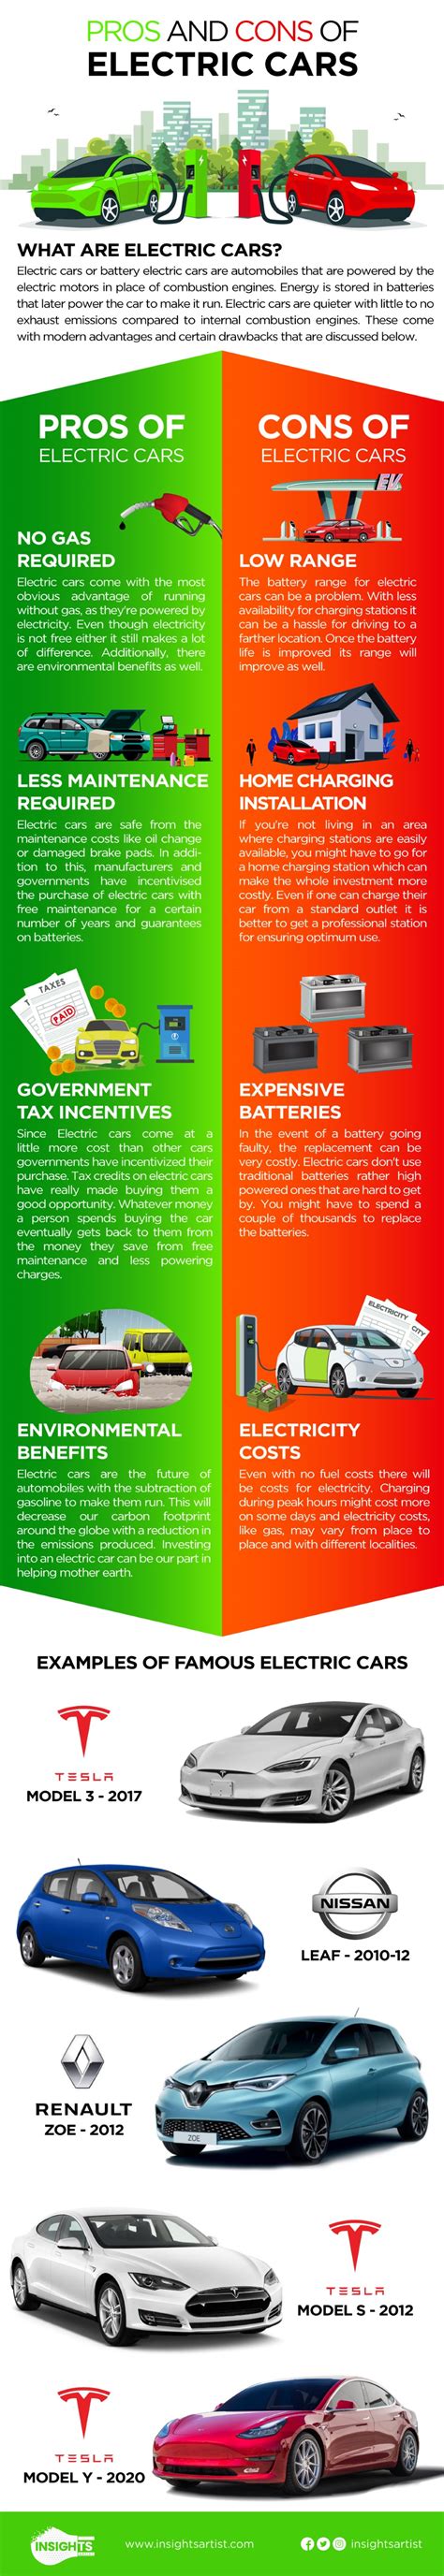 Pros And Cons Of Electric Cars Visual Content Insightsartist